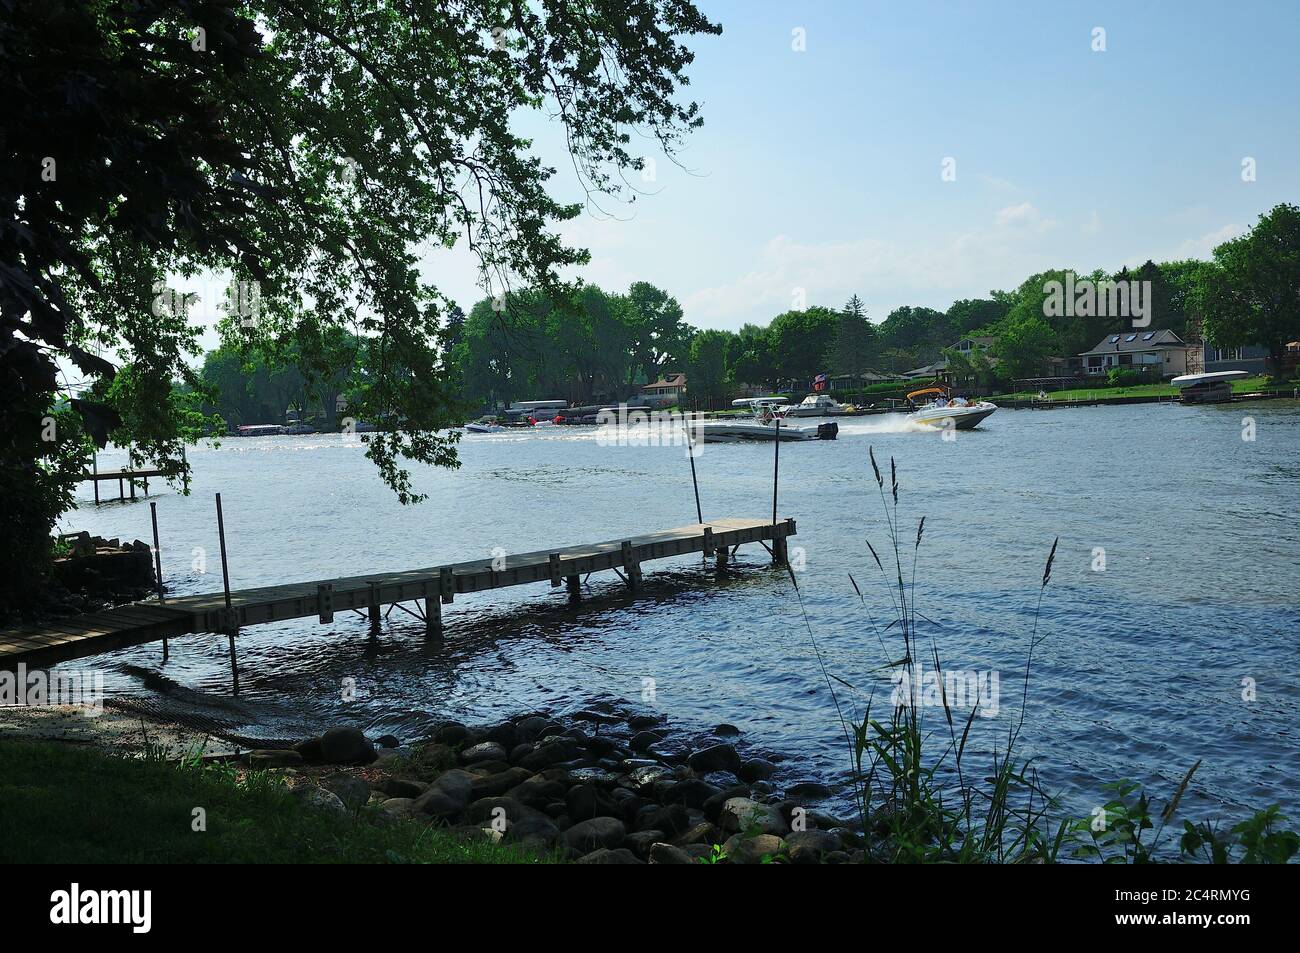 A dock jutting out into the Fox River in Northern Illinois, USA. Stock Photo